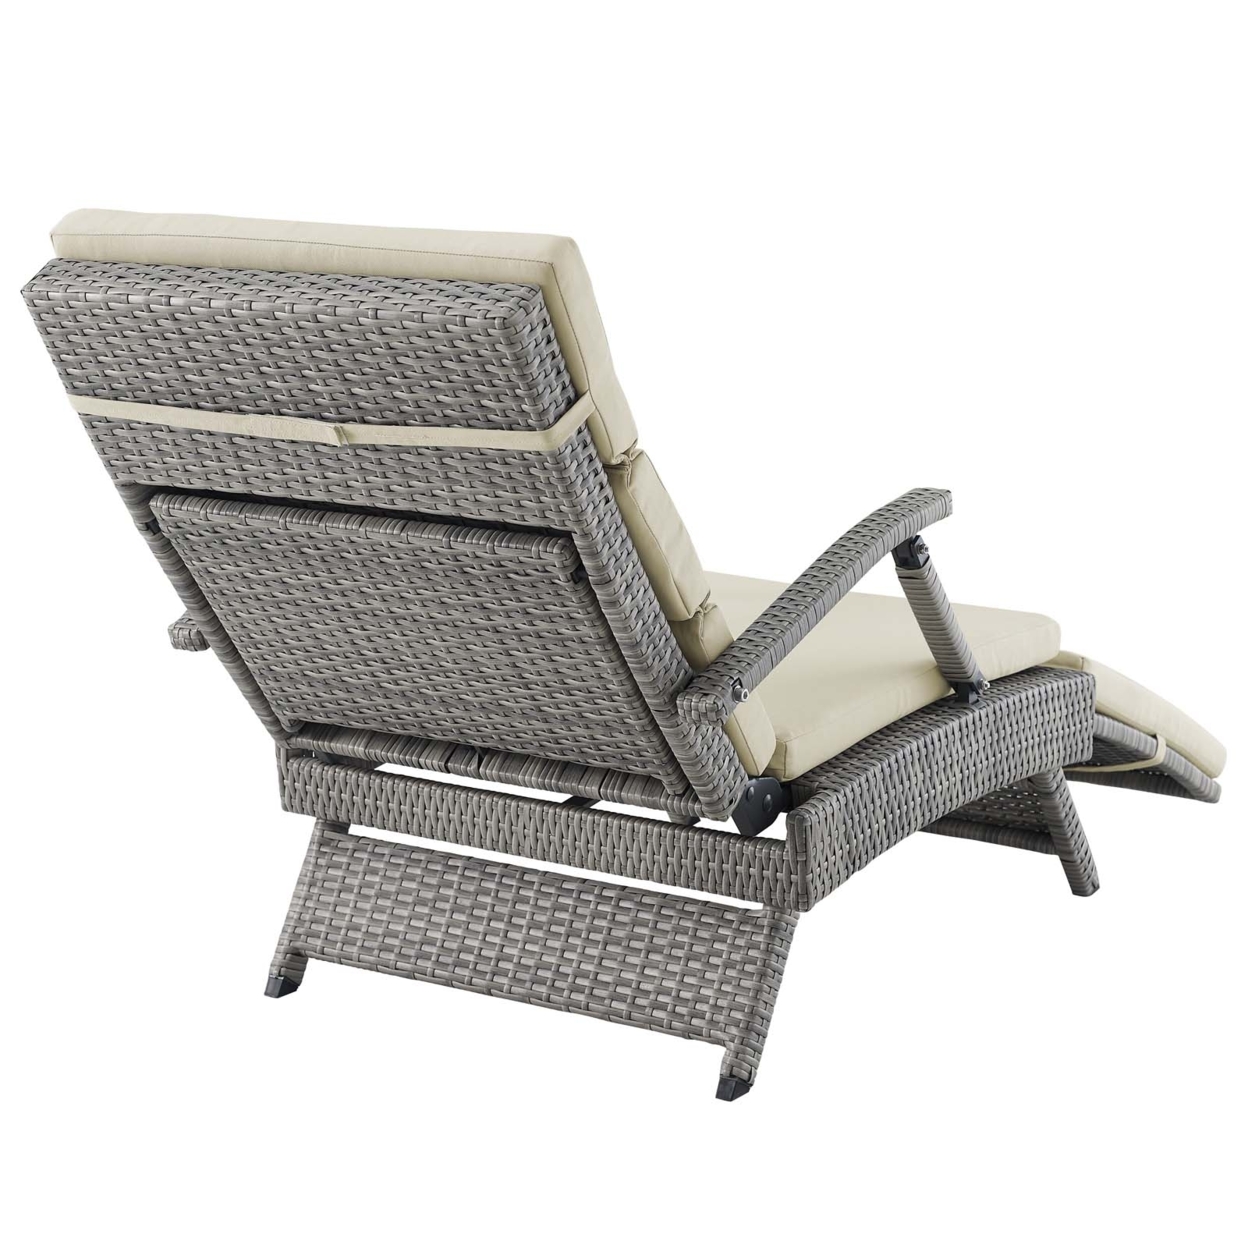 Envisage Chaise Outdoor Patio Wicker Rattan Lounge Chair,Light Gray Beige